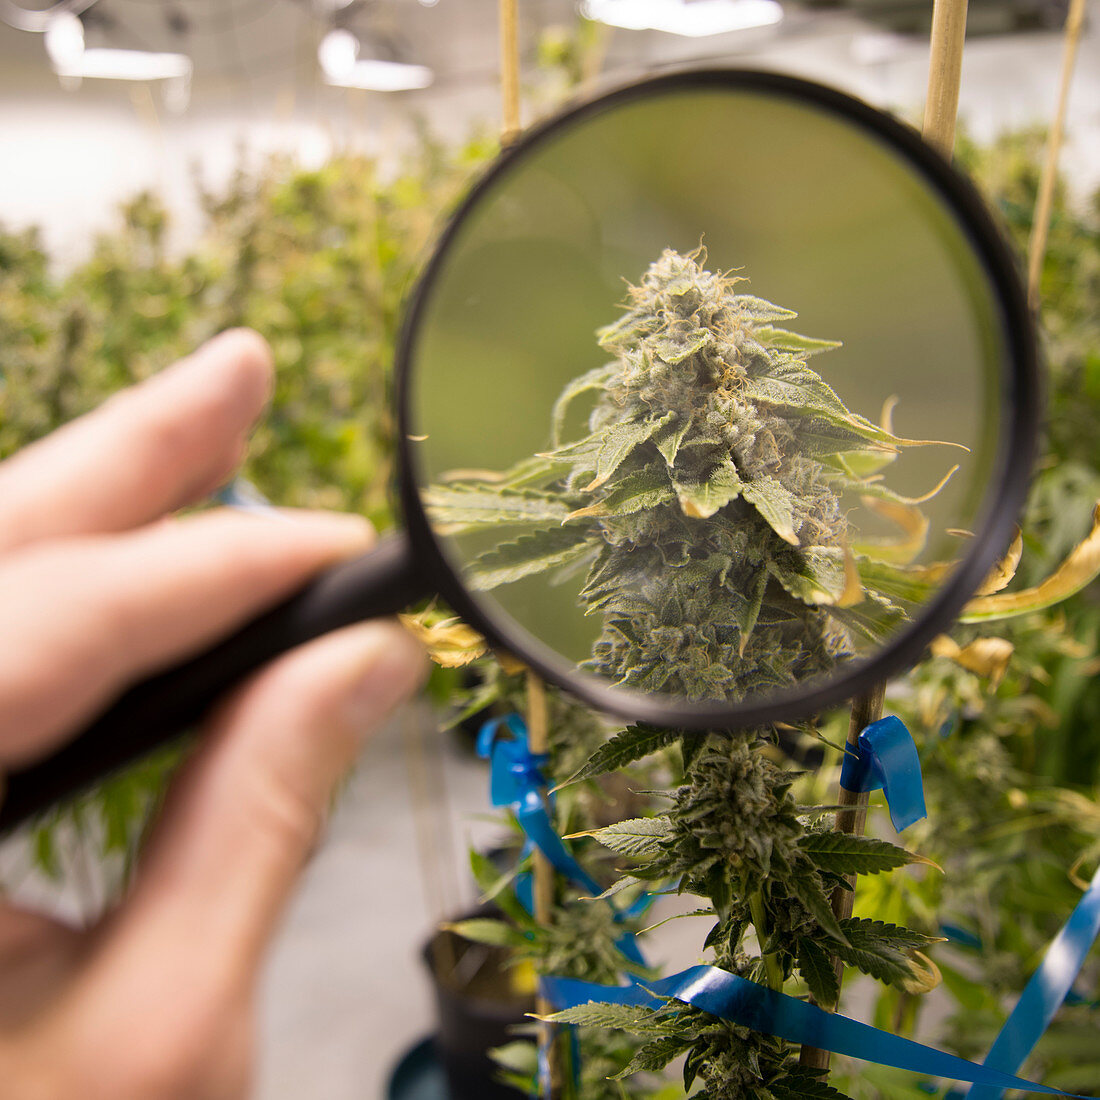 Denver, Colorado- Looking through a magnification glass inspecting the trichomes of a medical marijuana plant in Rx Green Solutions grow facility